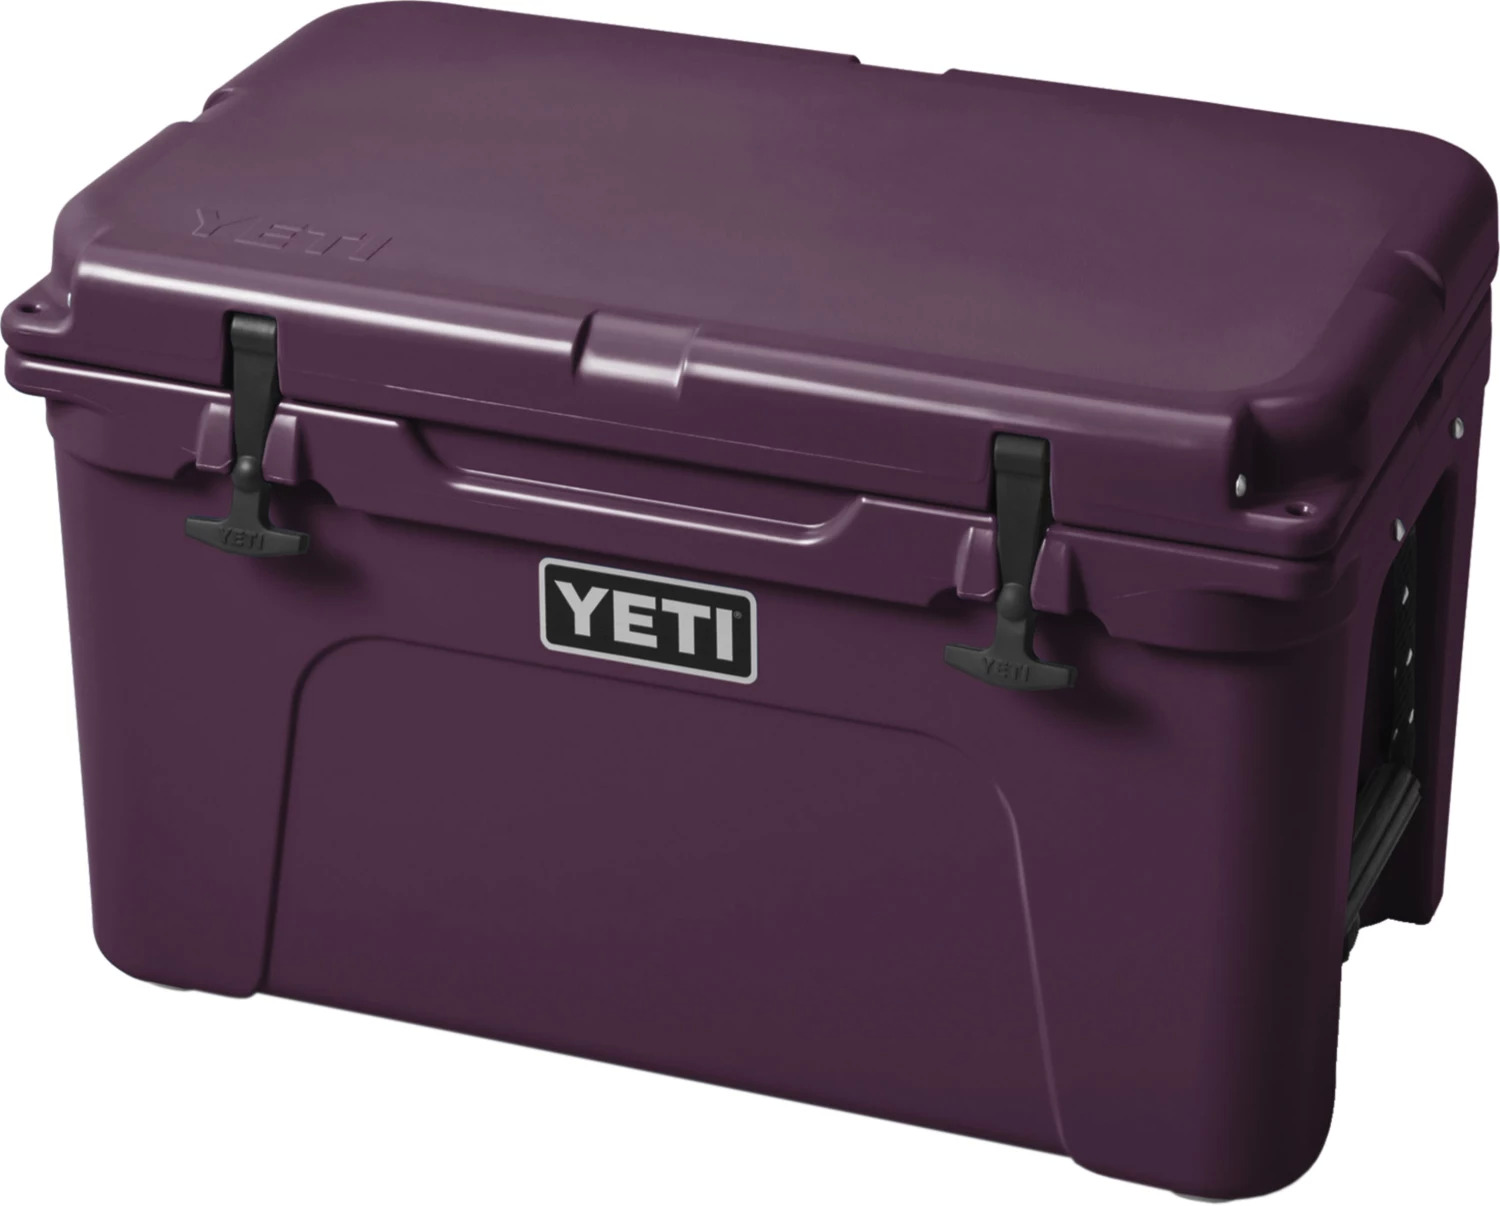 Yeti Tundra 45 cooler $260 at Dick's Sporting Goods